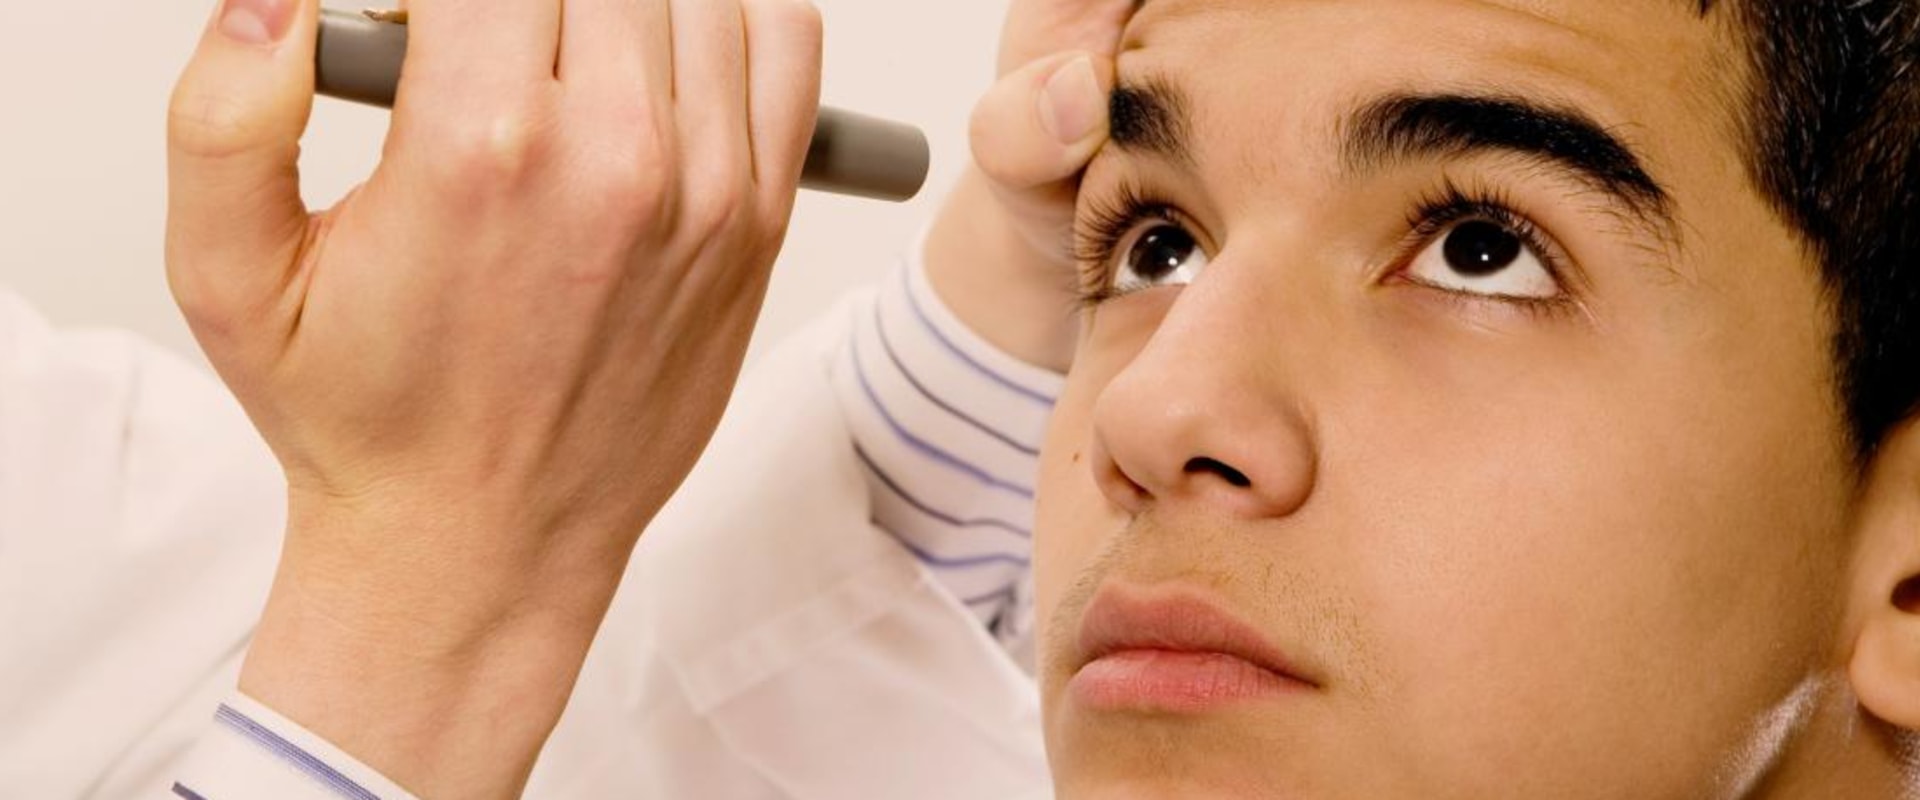 What Should You Not Do Before an Eye Exam?